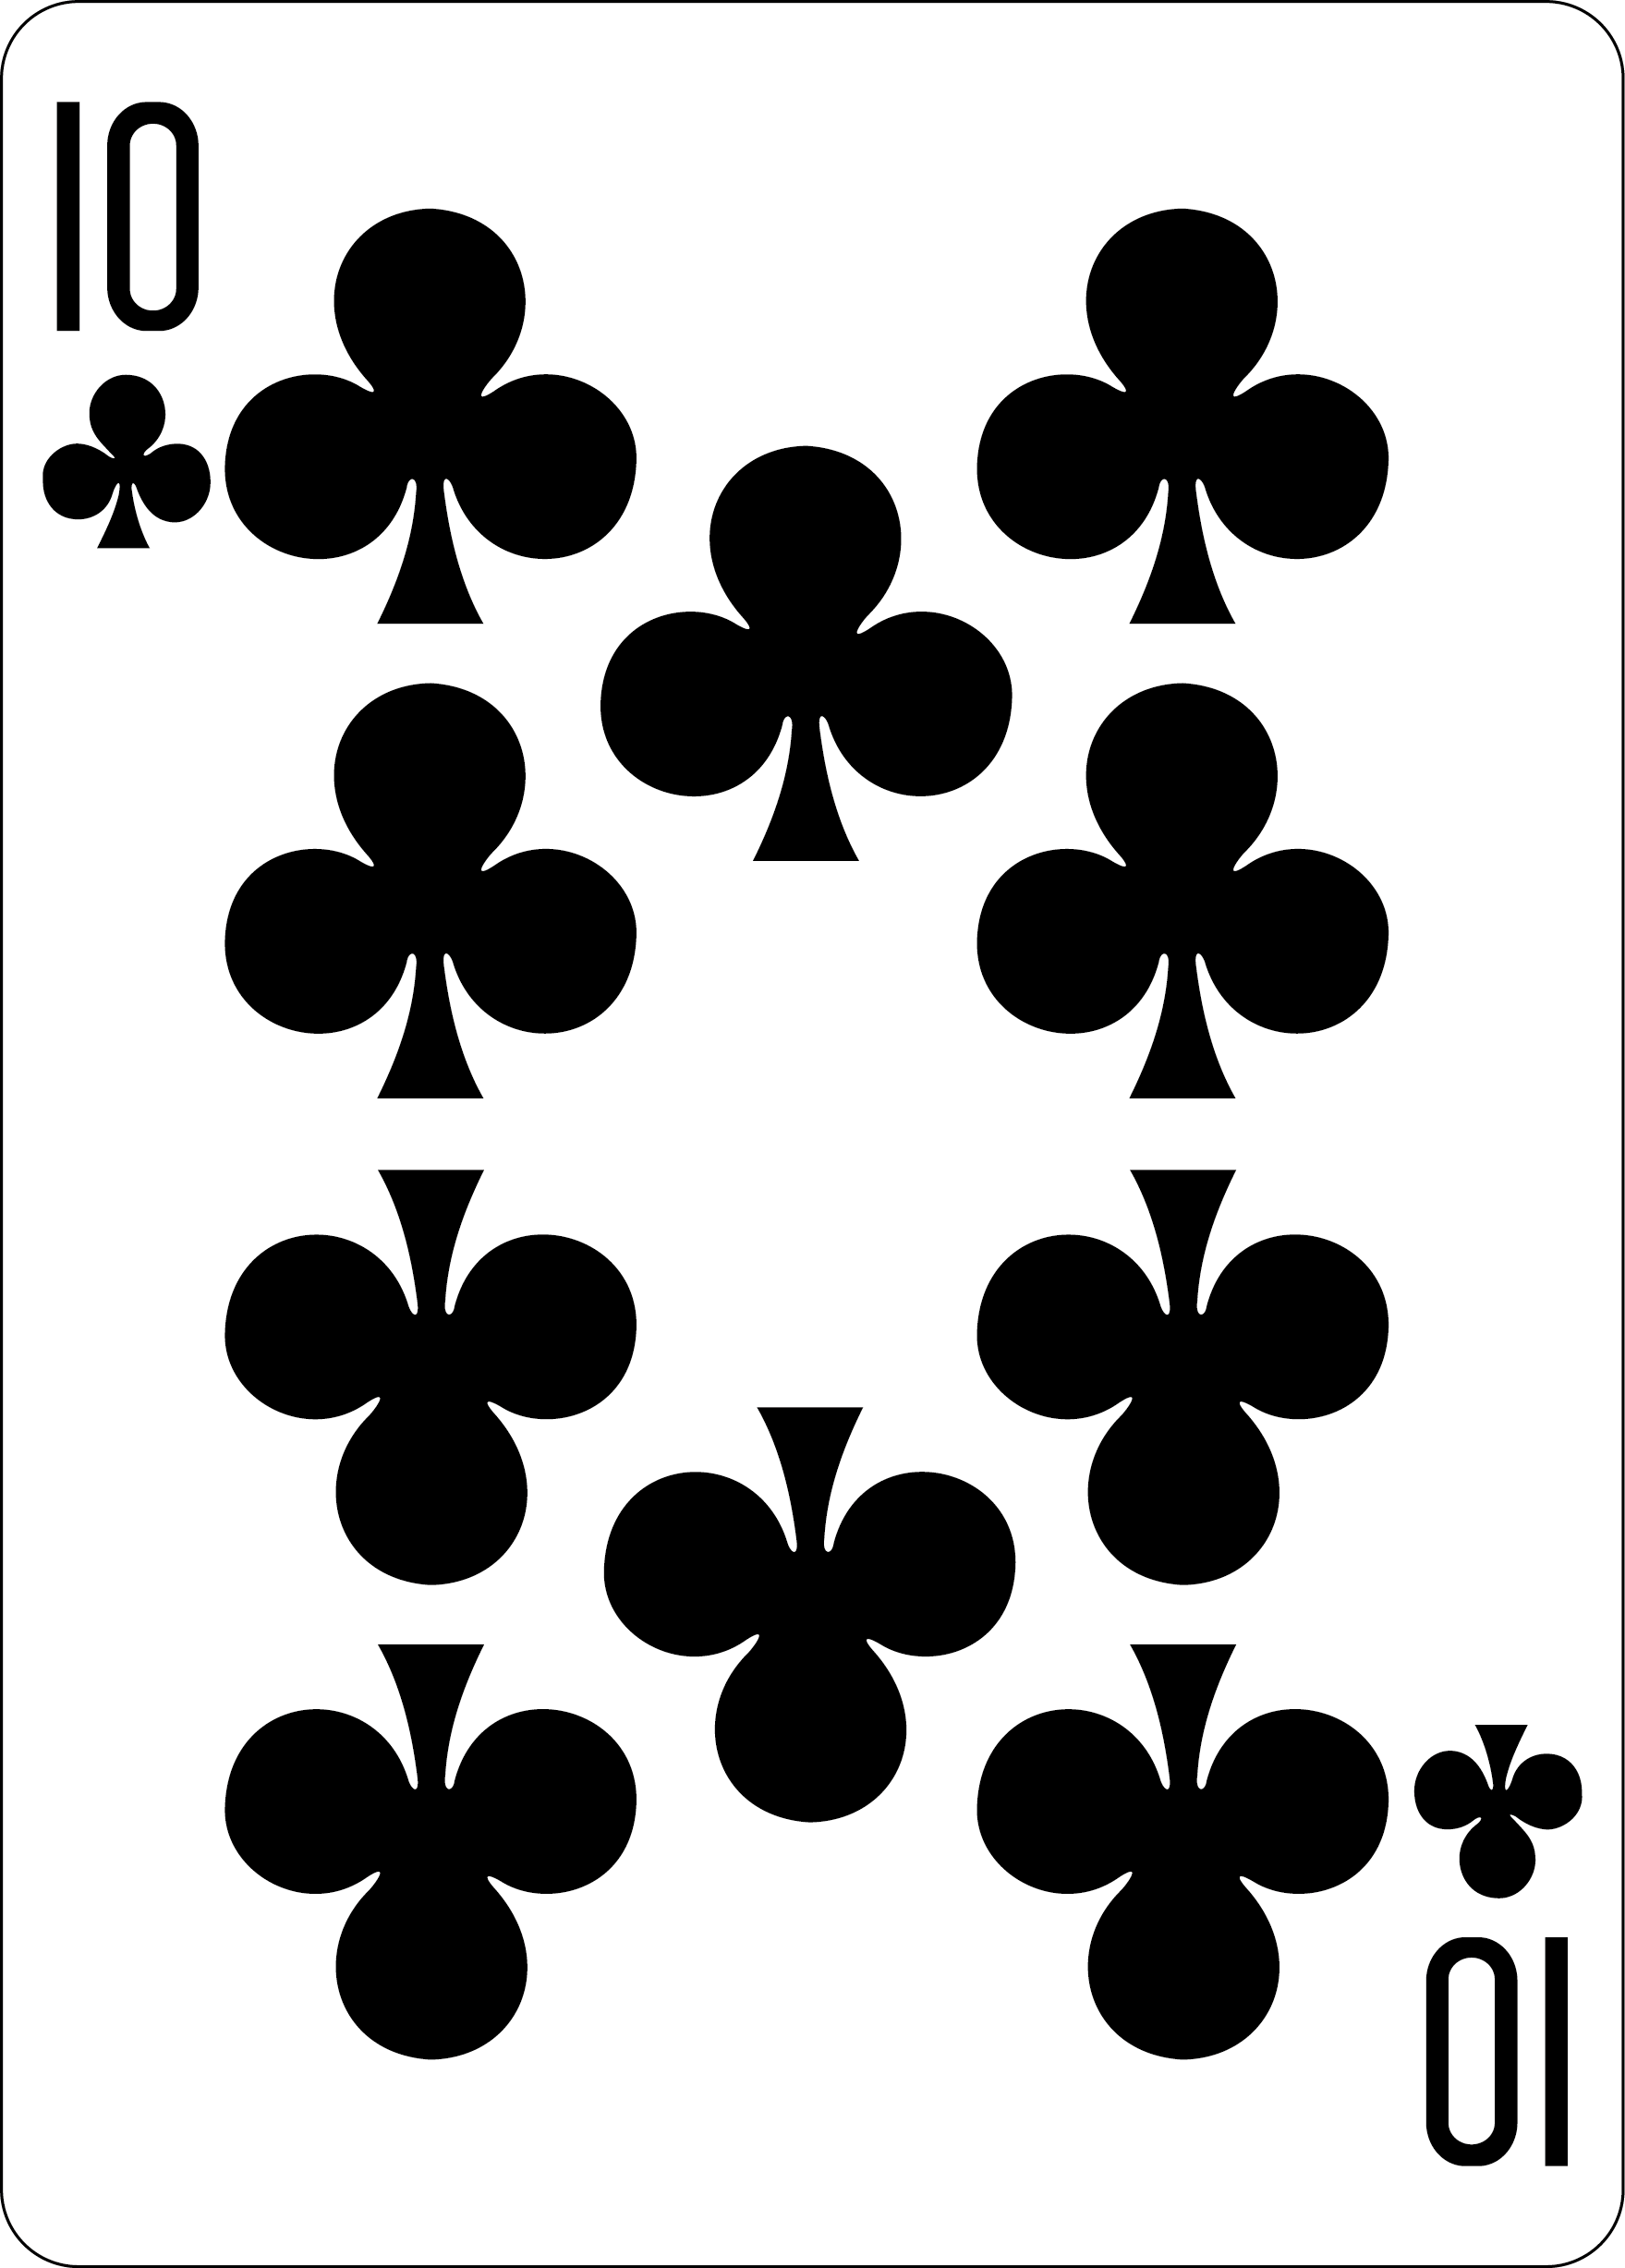 10 of Clubs